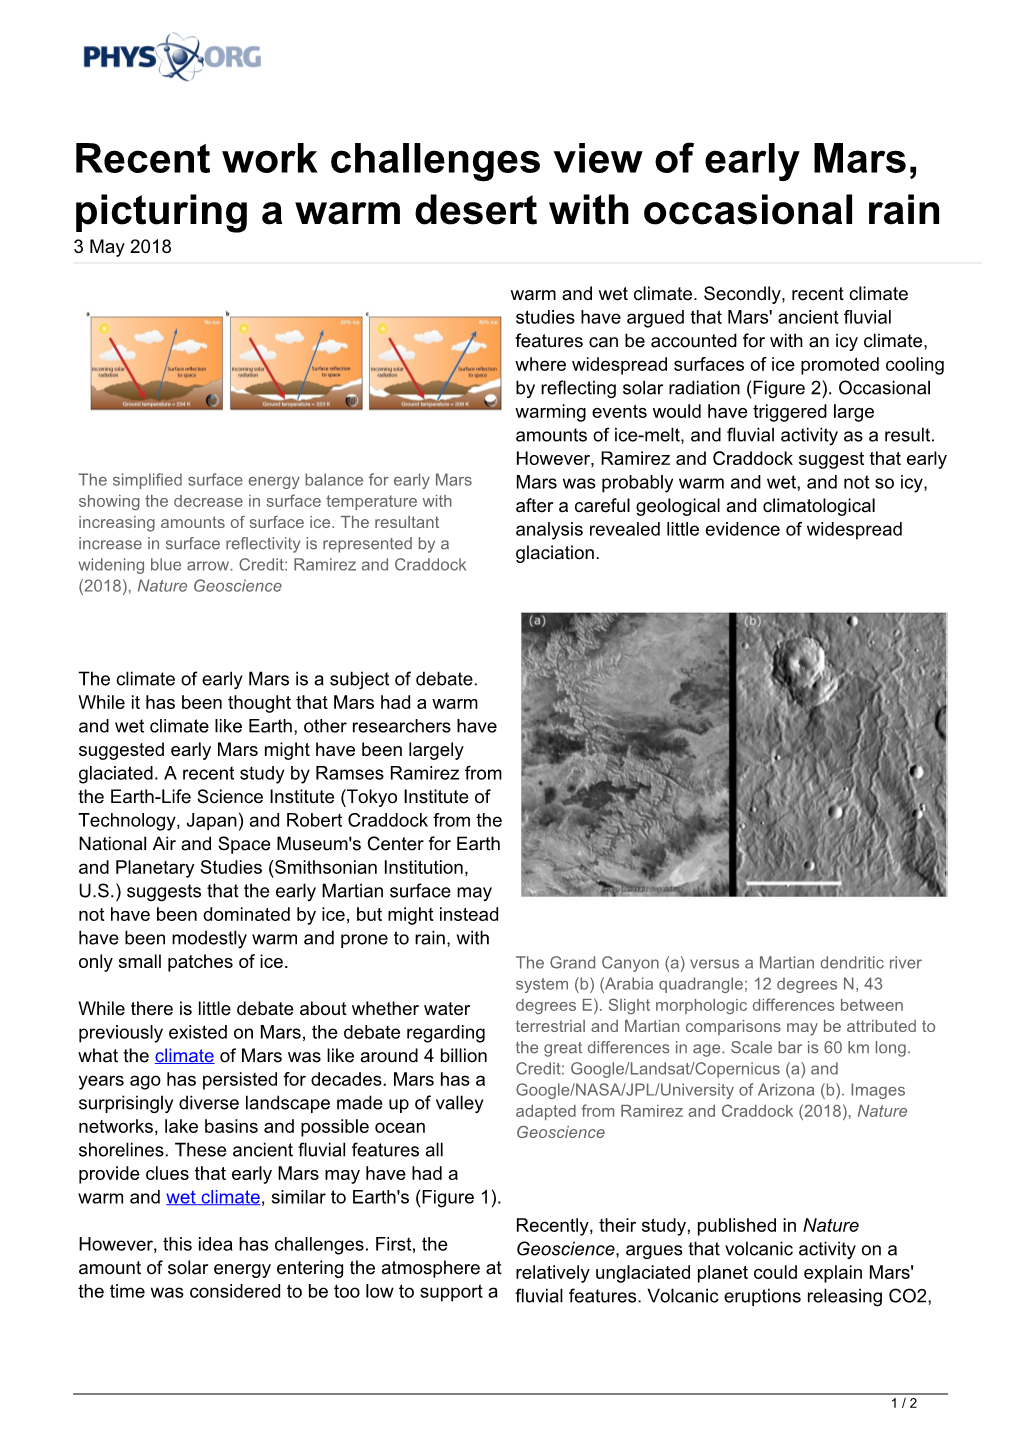 Recent Work Challenges View of Early Mars, Picturing a Warm Desert with Occasional Rain 3 May 2018